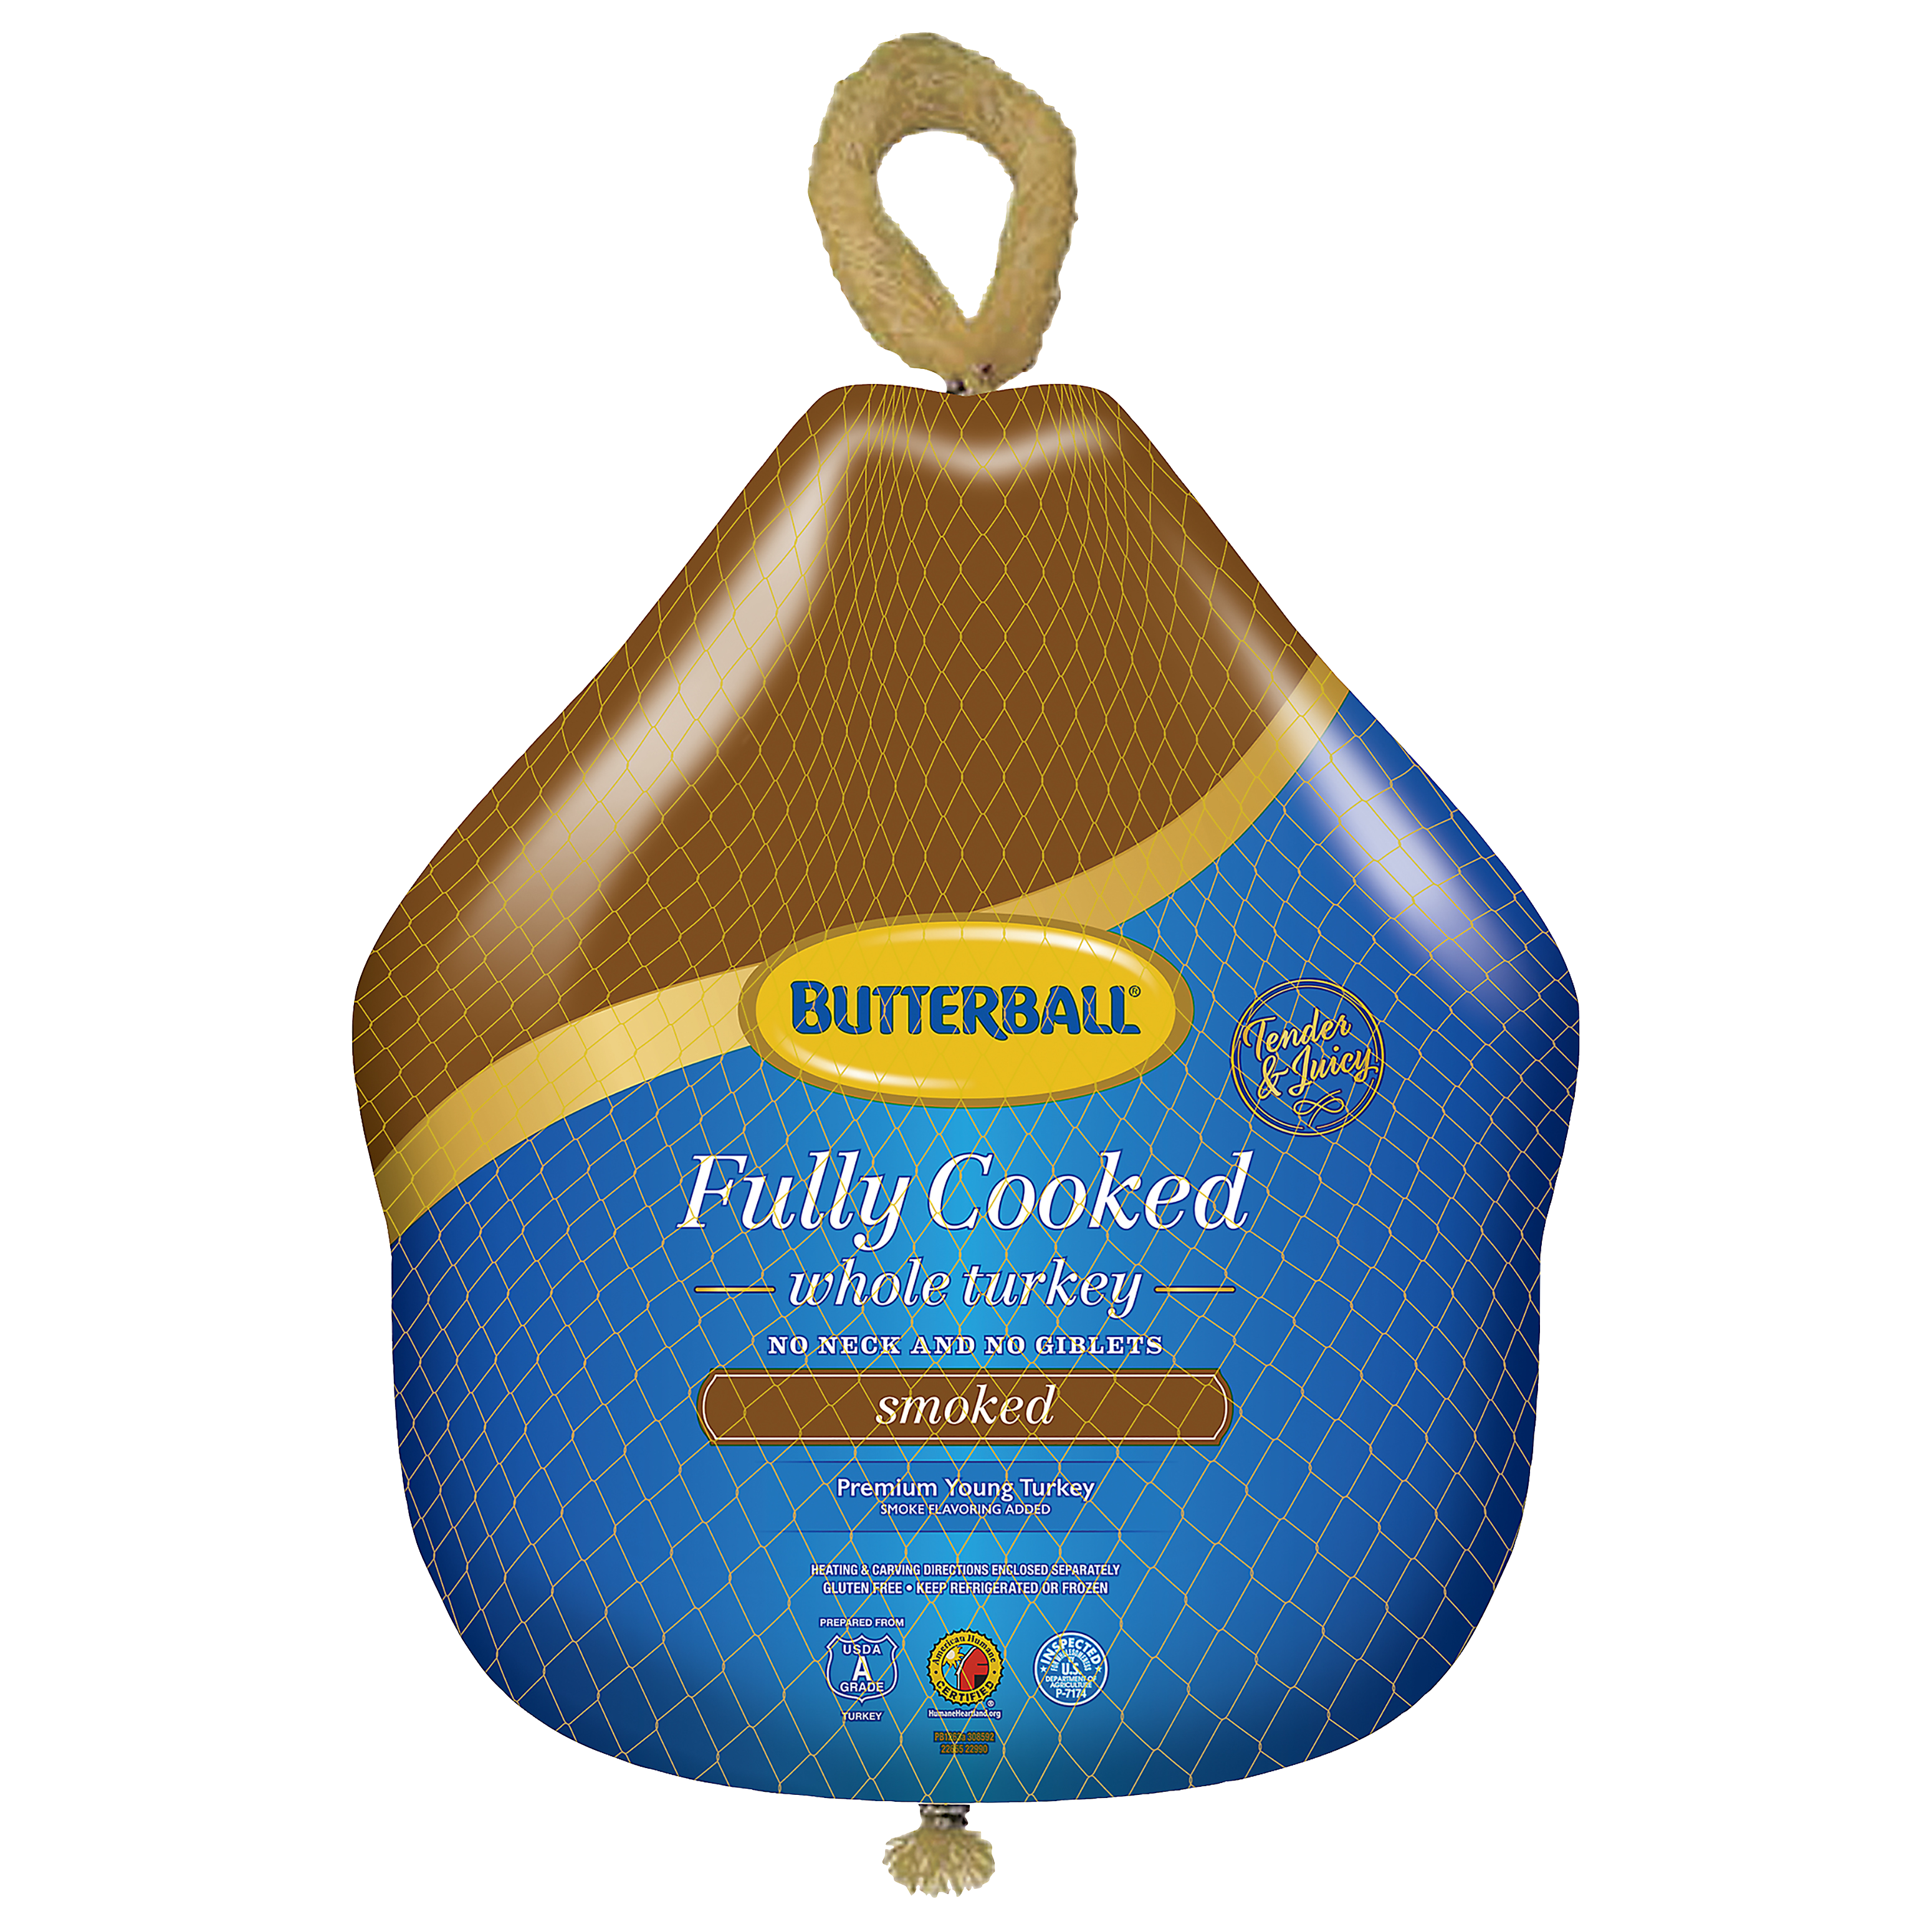 https://www.butterball.com/sites/butterball/files/2022-10/Butterball_Whole-Turkey_00022655229902_CF_0.png